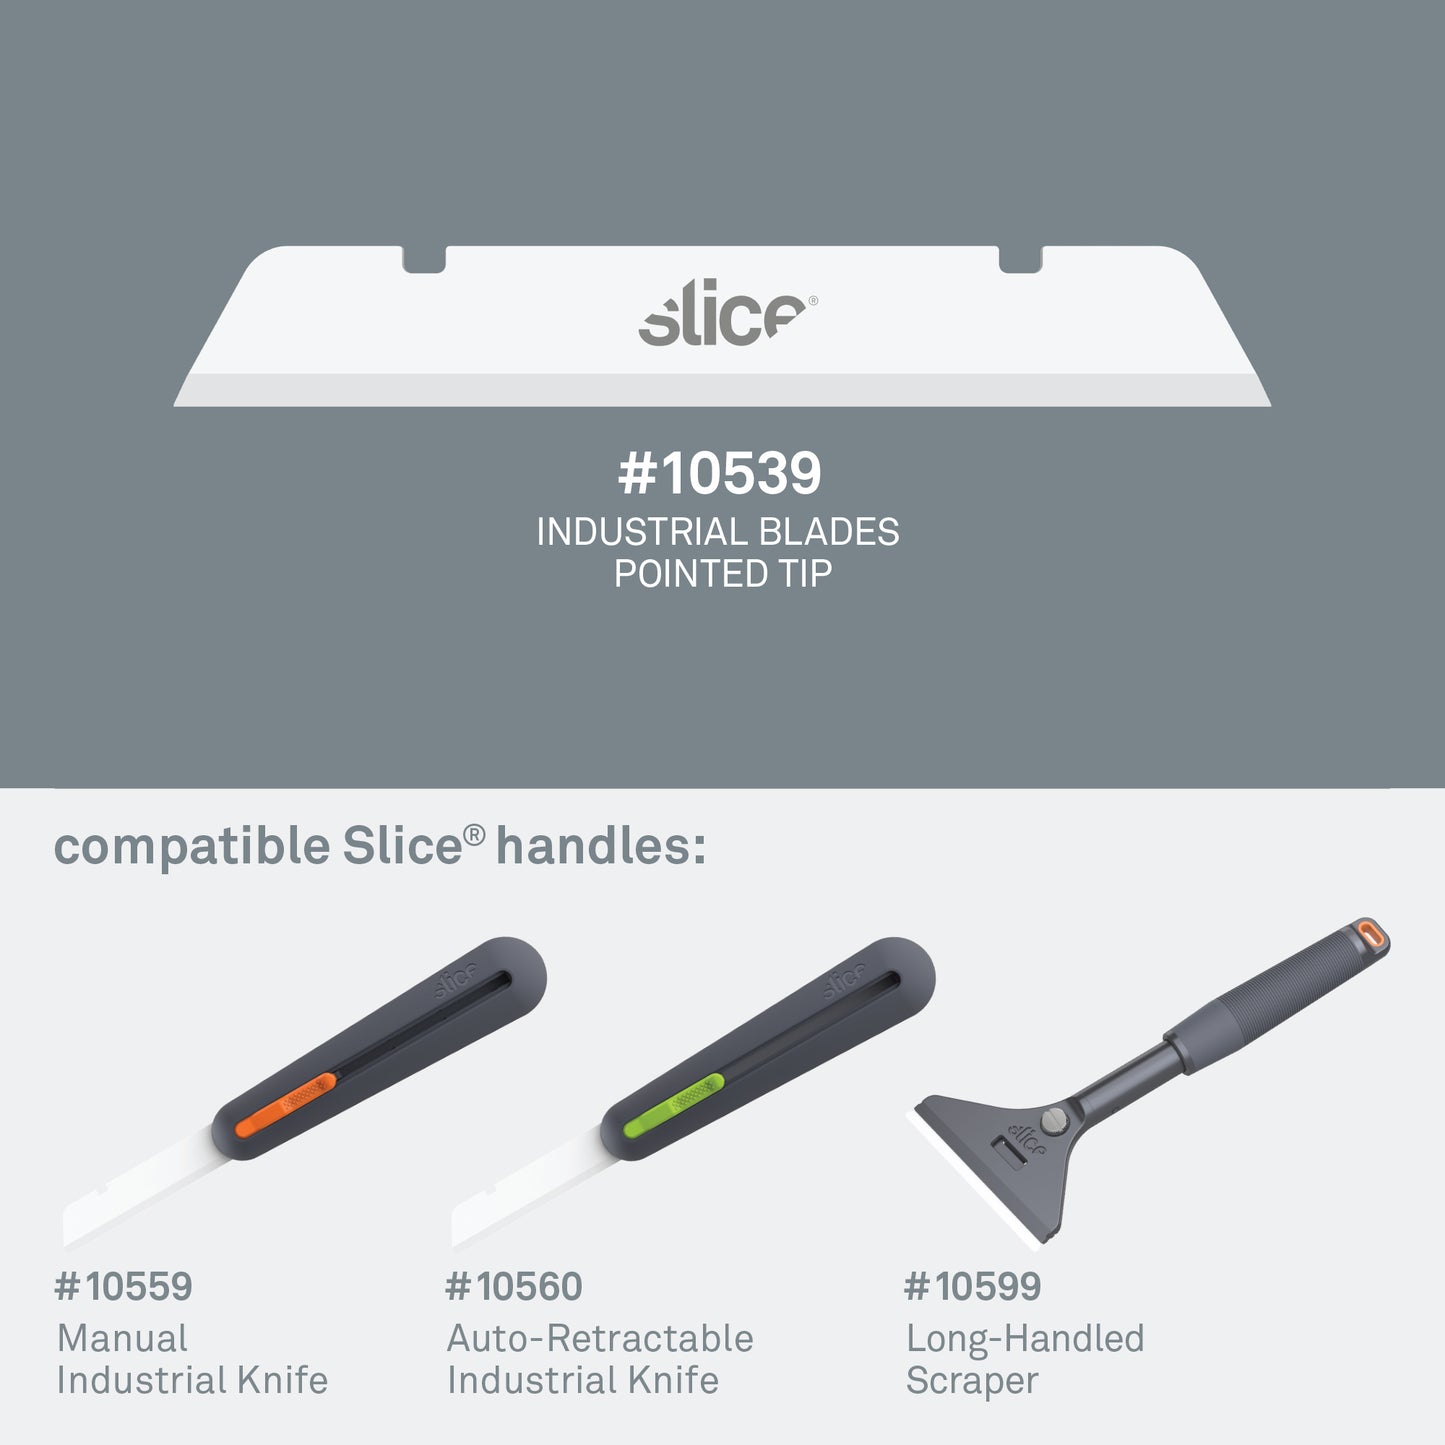 Slice Industrial Blades (Pointed Tip) - DaltonSafety